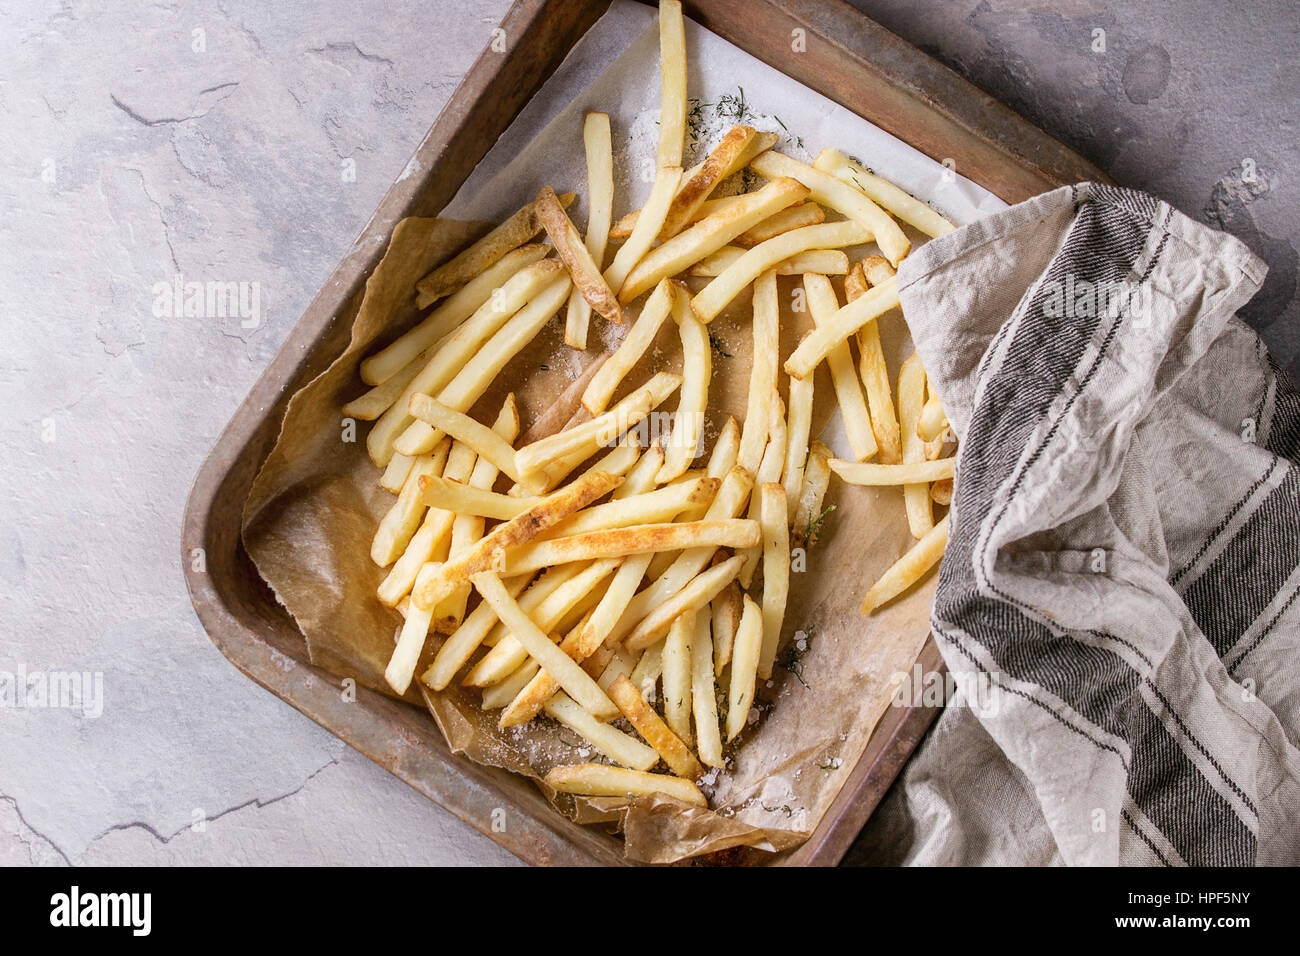 Fast food french fries potatoes with skin served with salt on baking paper in old rusty oven tray with kitchen towel over gray texture background. Top Stock Photo